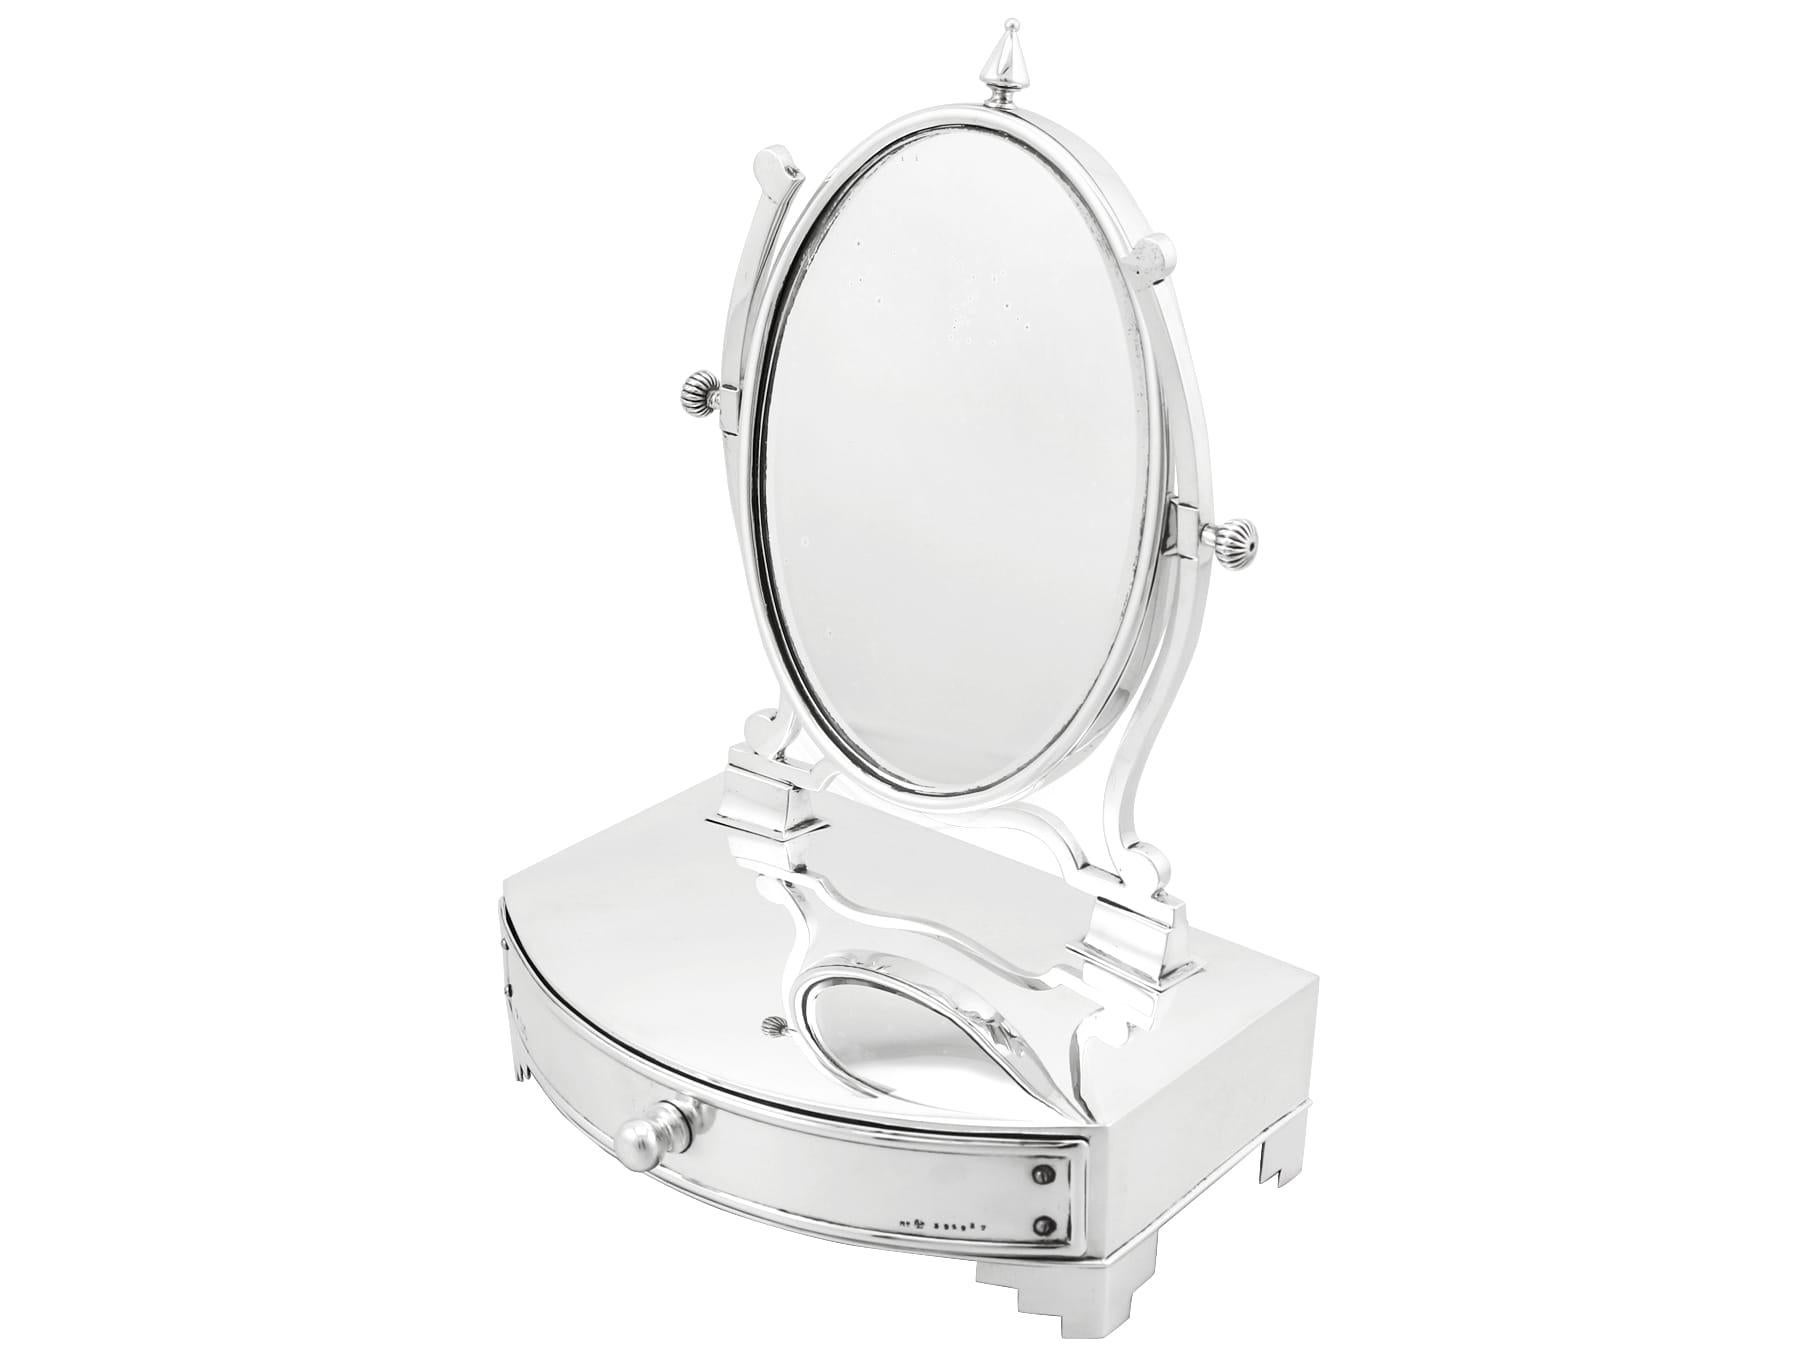 An exceptional, rare antique Edwardian English sterling silver dressing cheval table mirror and jewelry box; an addition to the ornamental silverware collection

This exceptional and rare antique sterling silver jewelry box with mirror has a